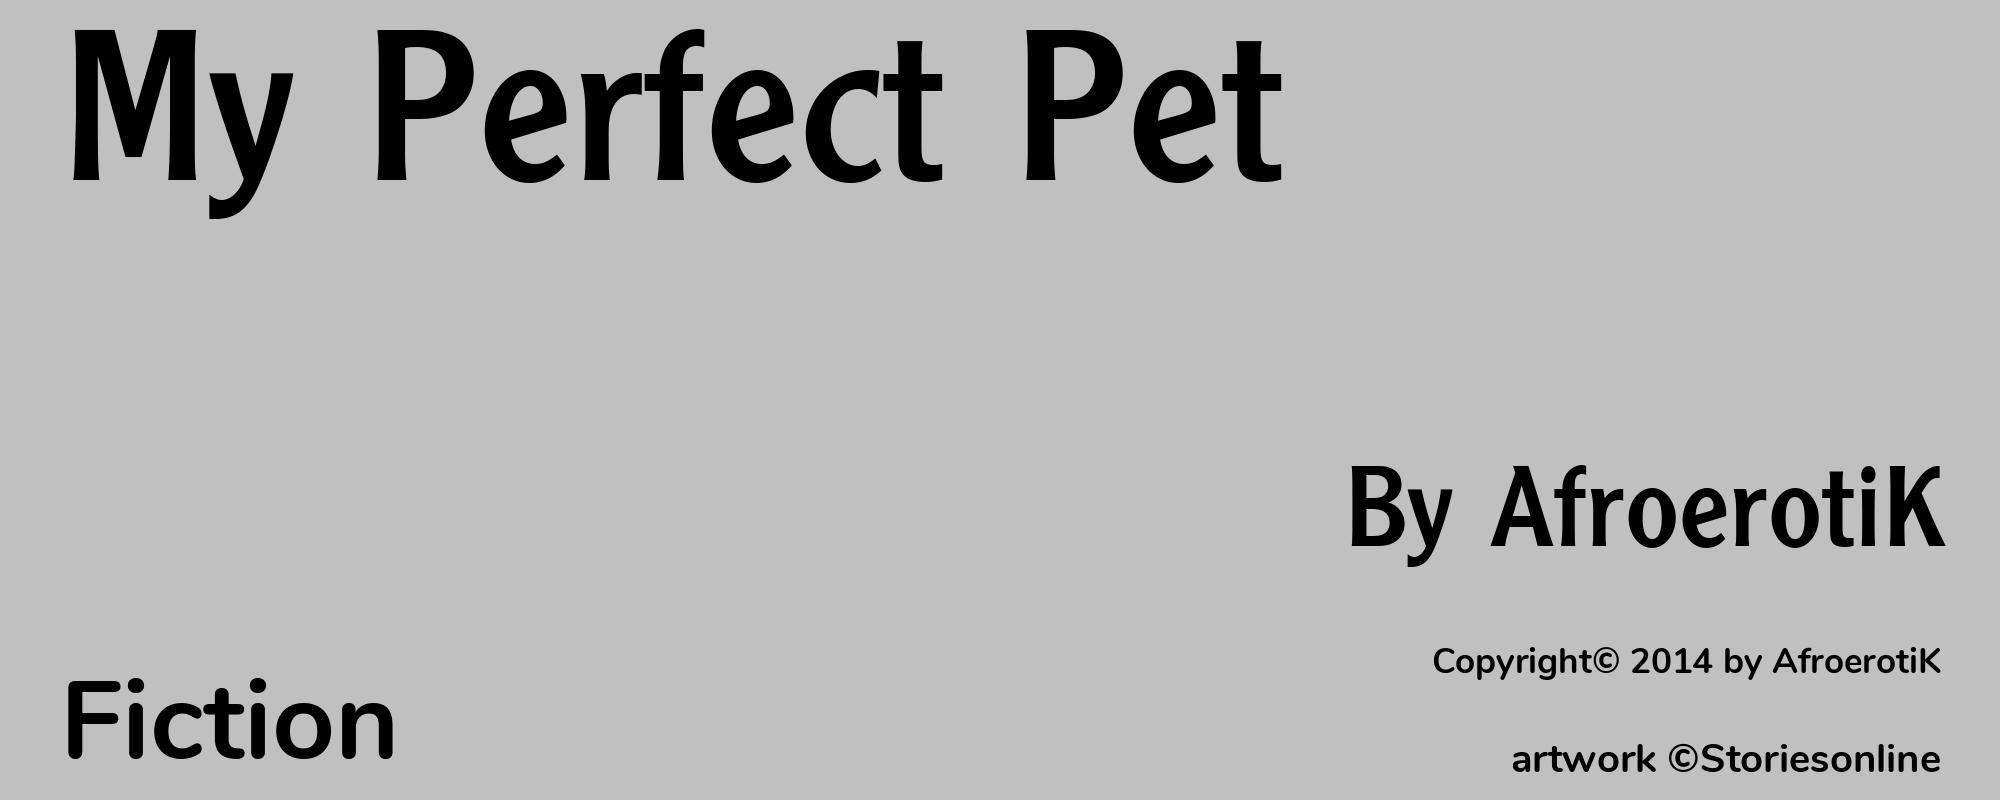 My Perfect Pet - Cover